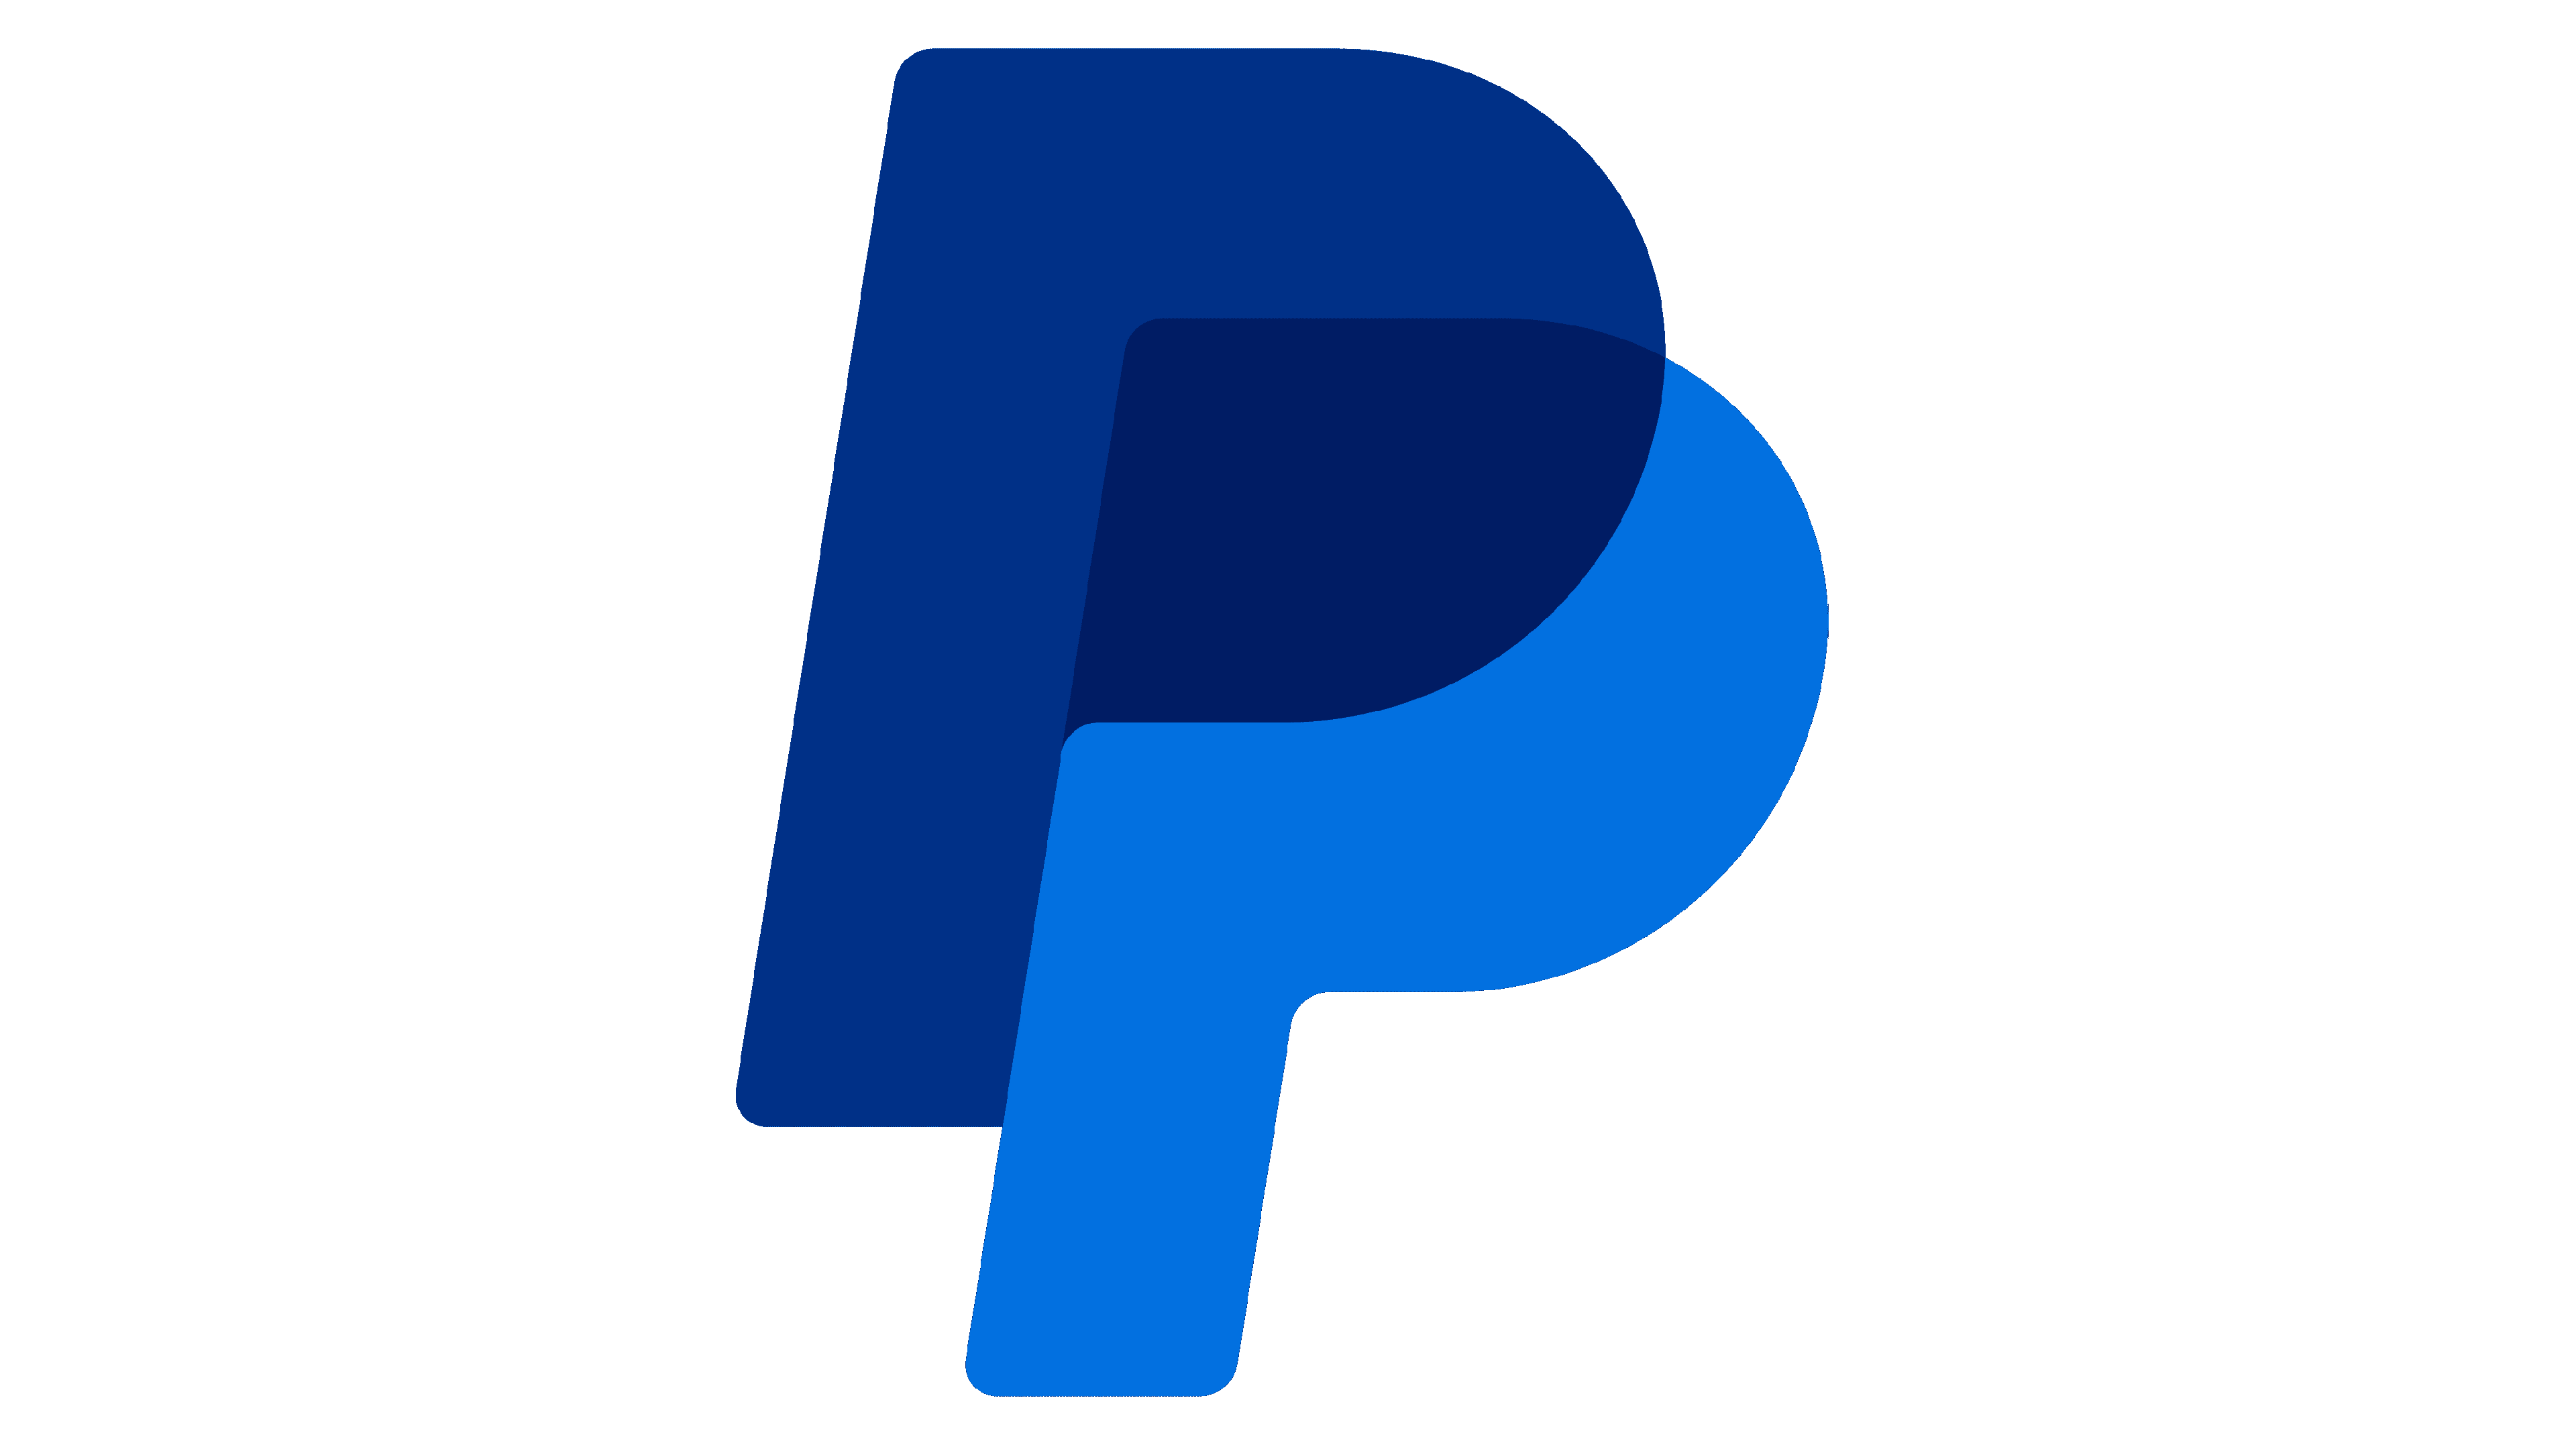 PayPal Logo and sign, new logo meaning and history, PNG, SVG